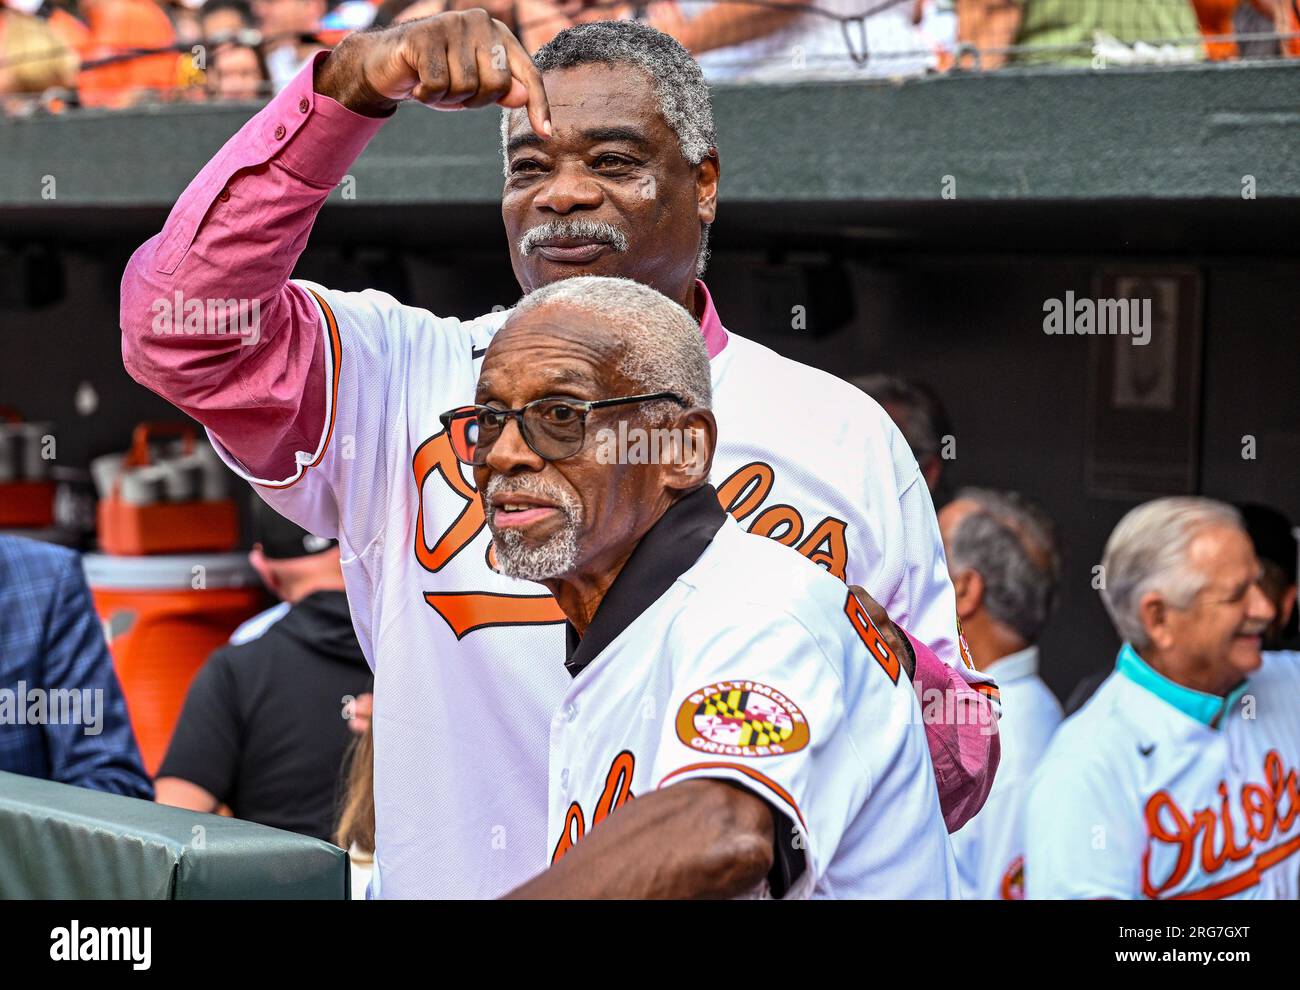 BALTIMORE, MD - August 5: Former Baltimore Orioles greats , Eddie Murray  (L) points to Al Bumbry (R) as they take the field for a ceremony to honor  the 1983 Orioles World